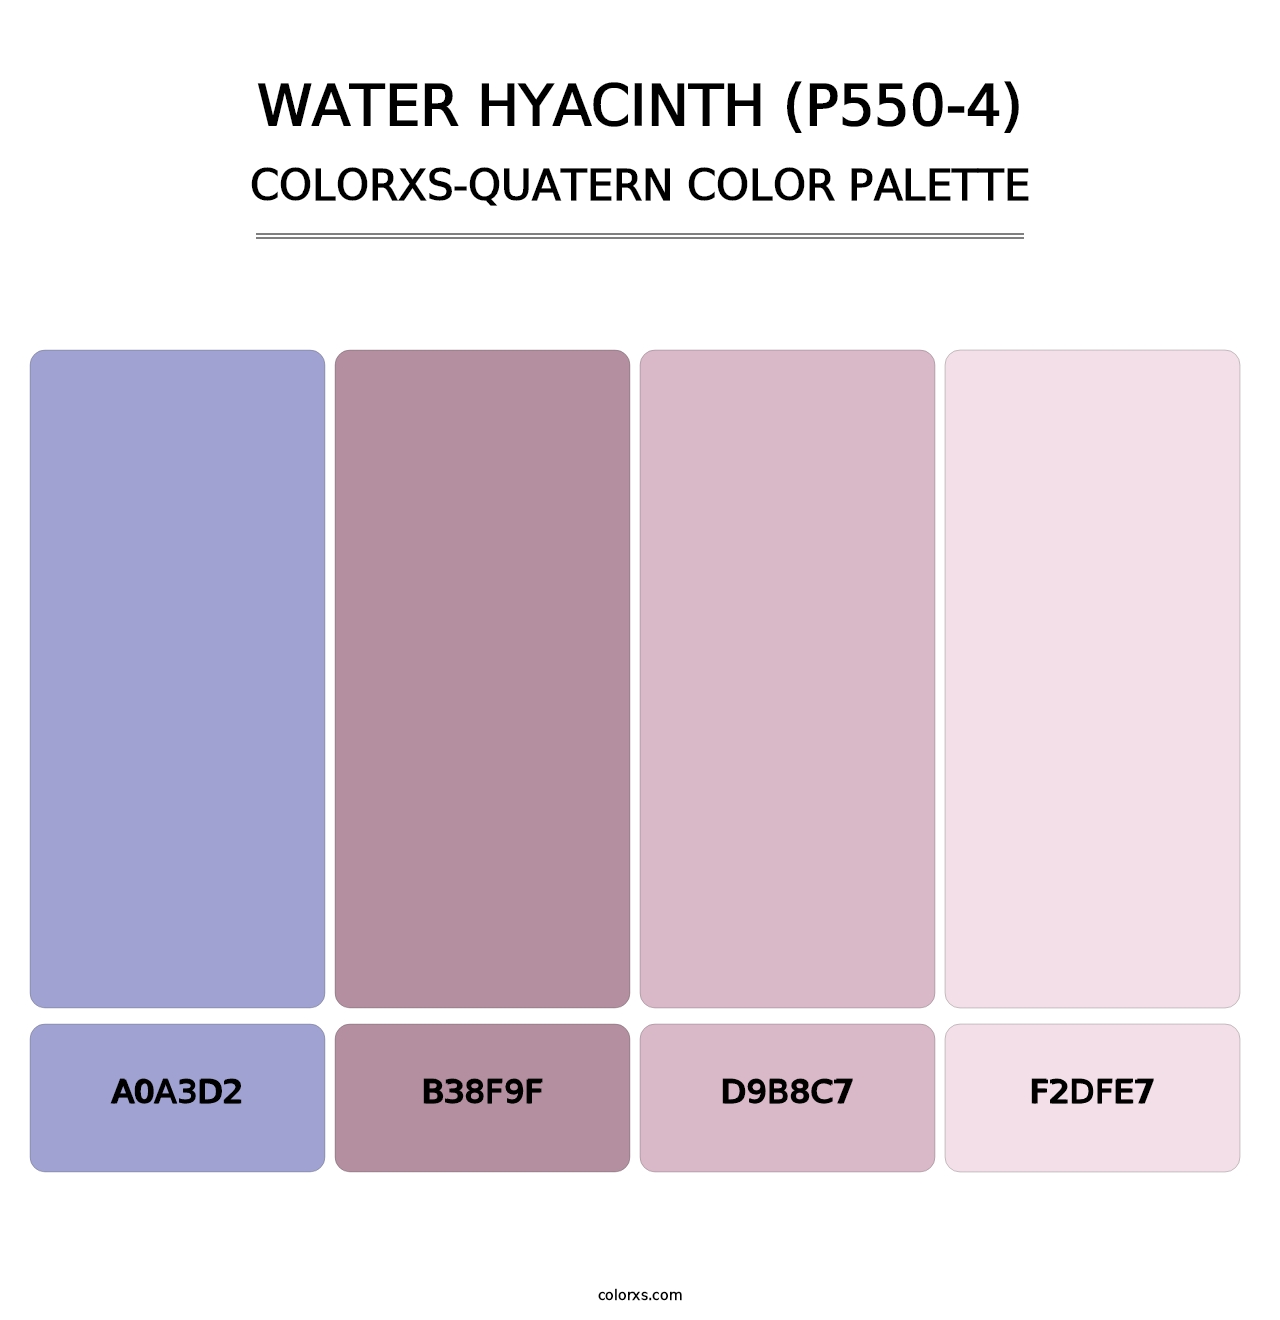 Water Hyacinth (P550-4) - Colorxs Quatern Palette